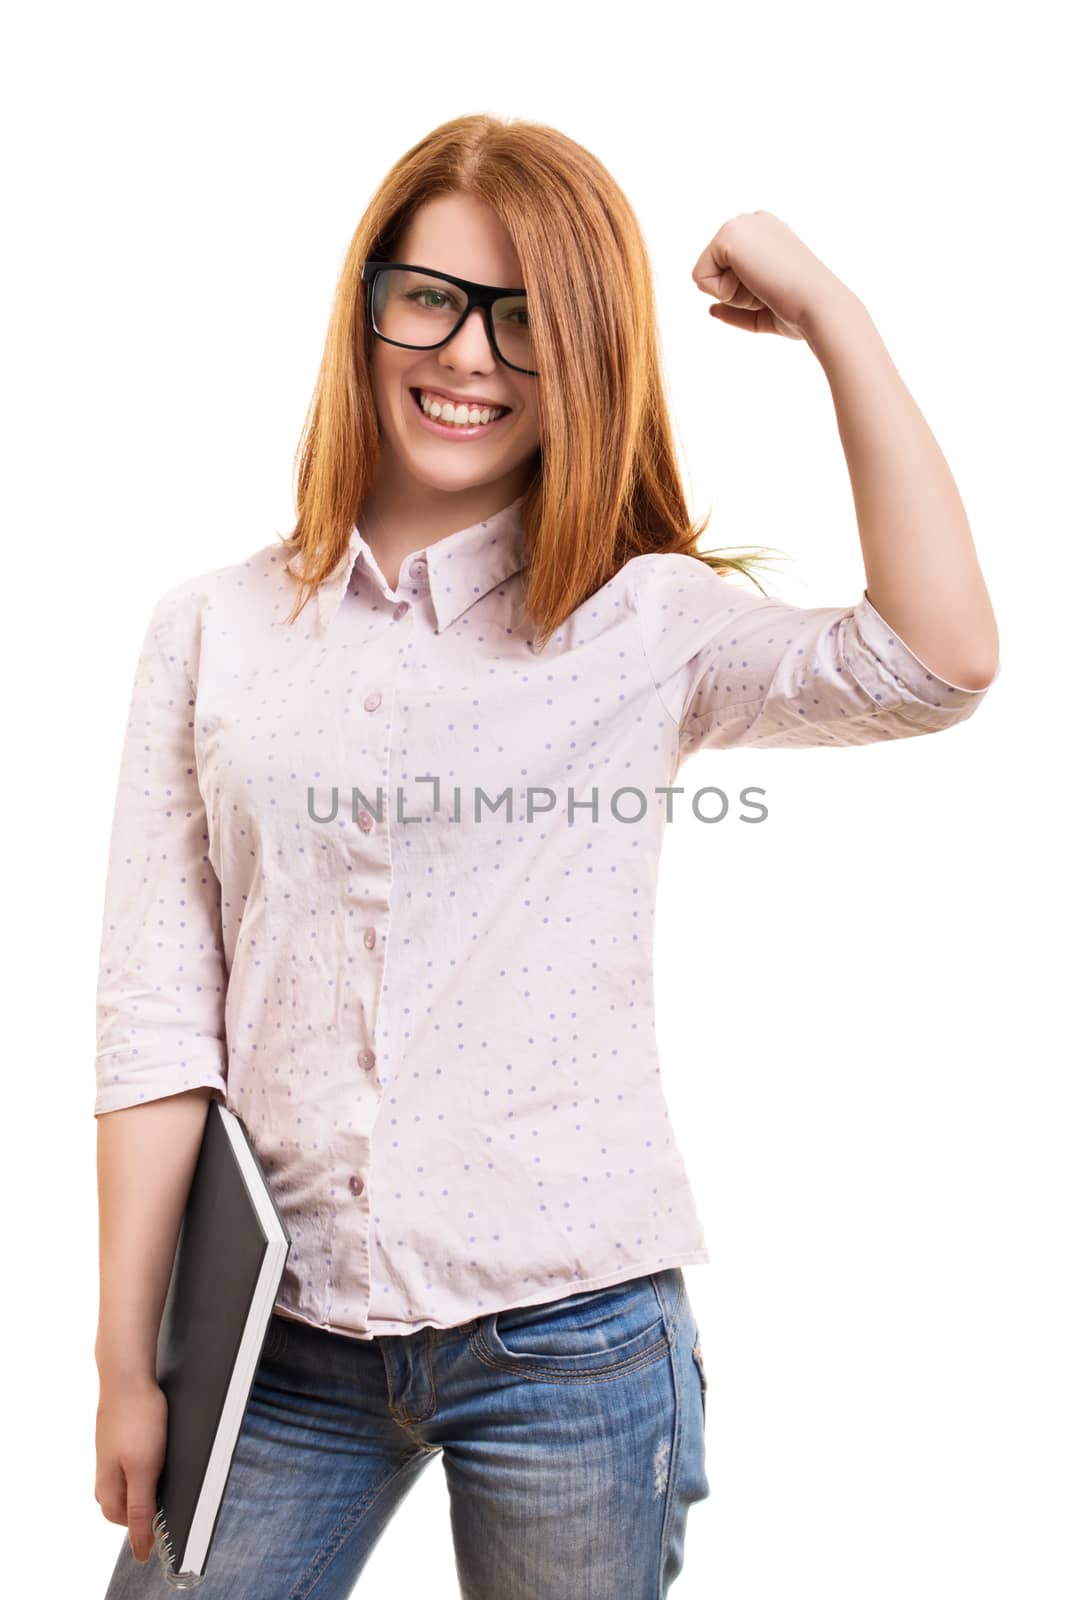 A portrait of a beautiful smiling girl with glasses, holding a book and cheering because of passed exams, isolated on a white background.